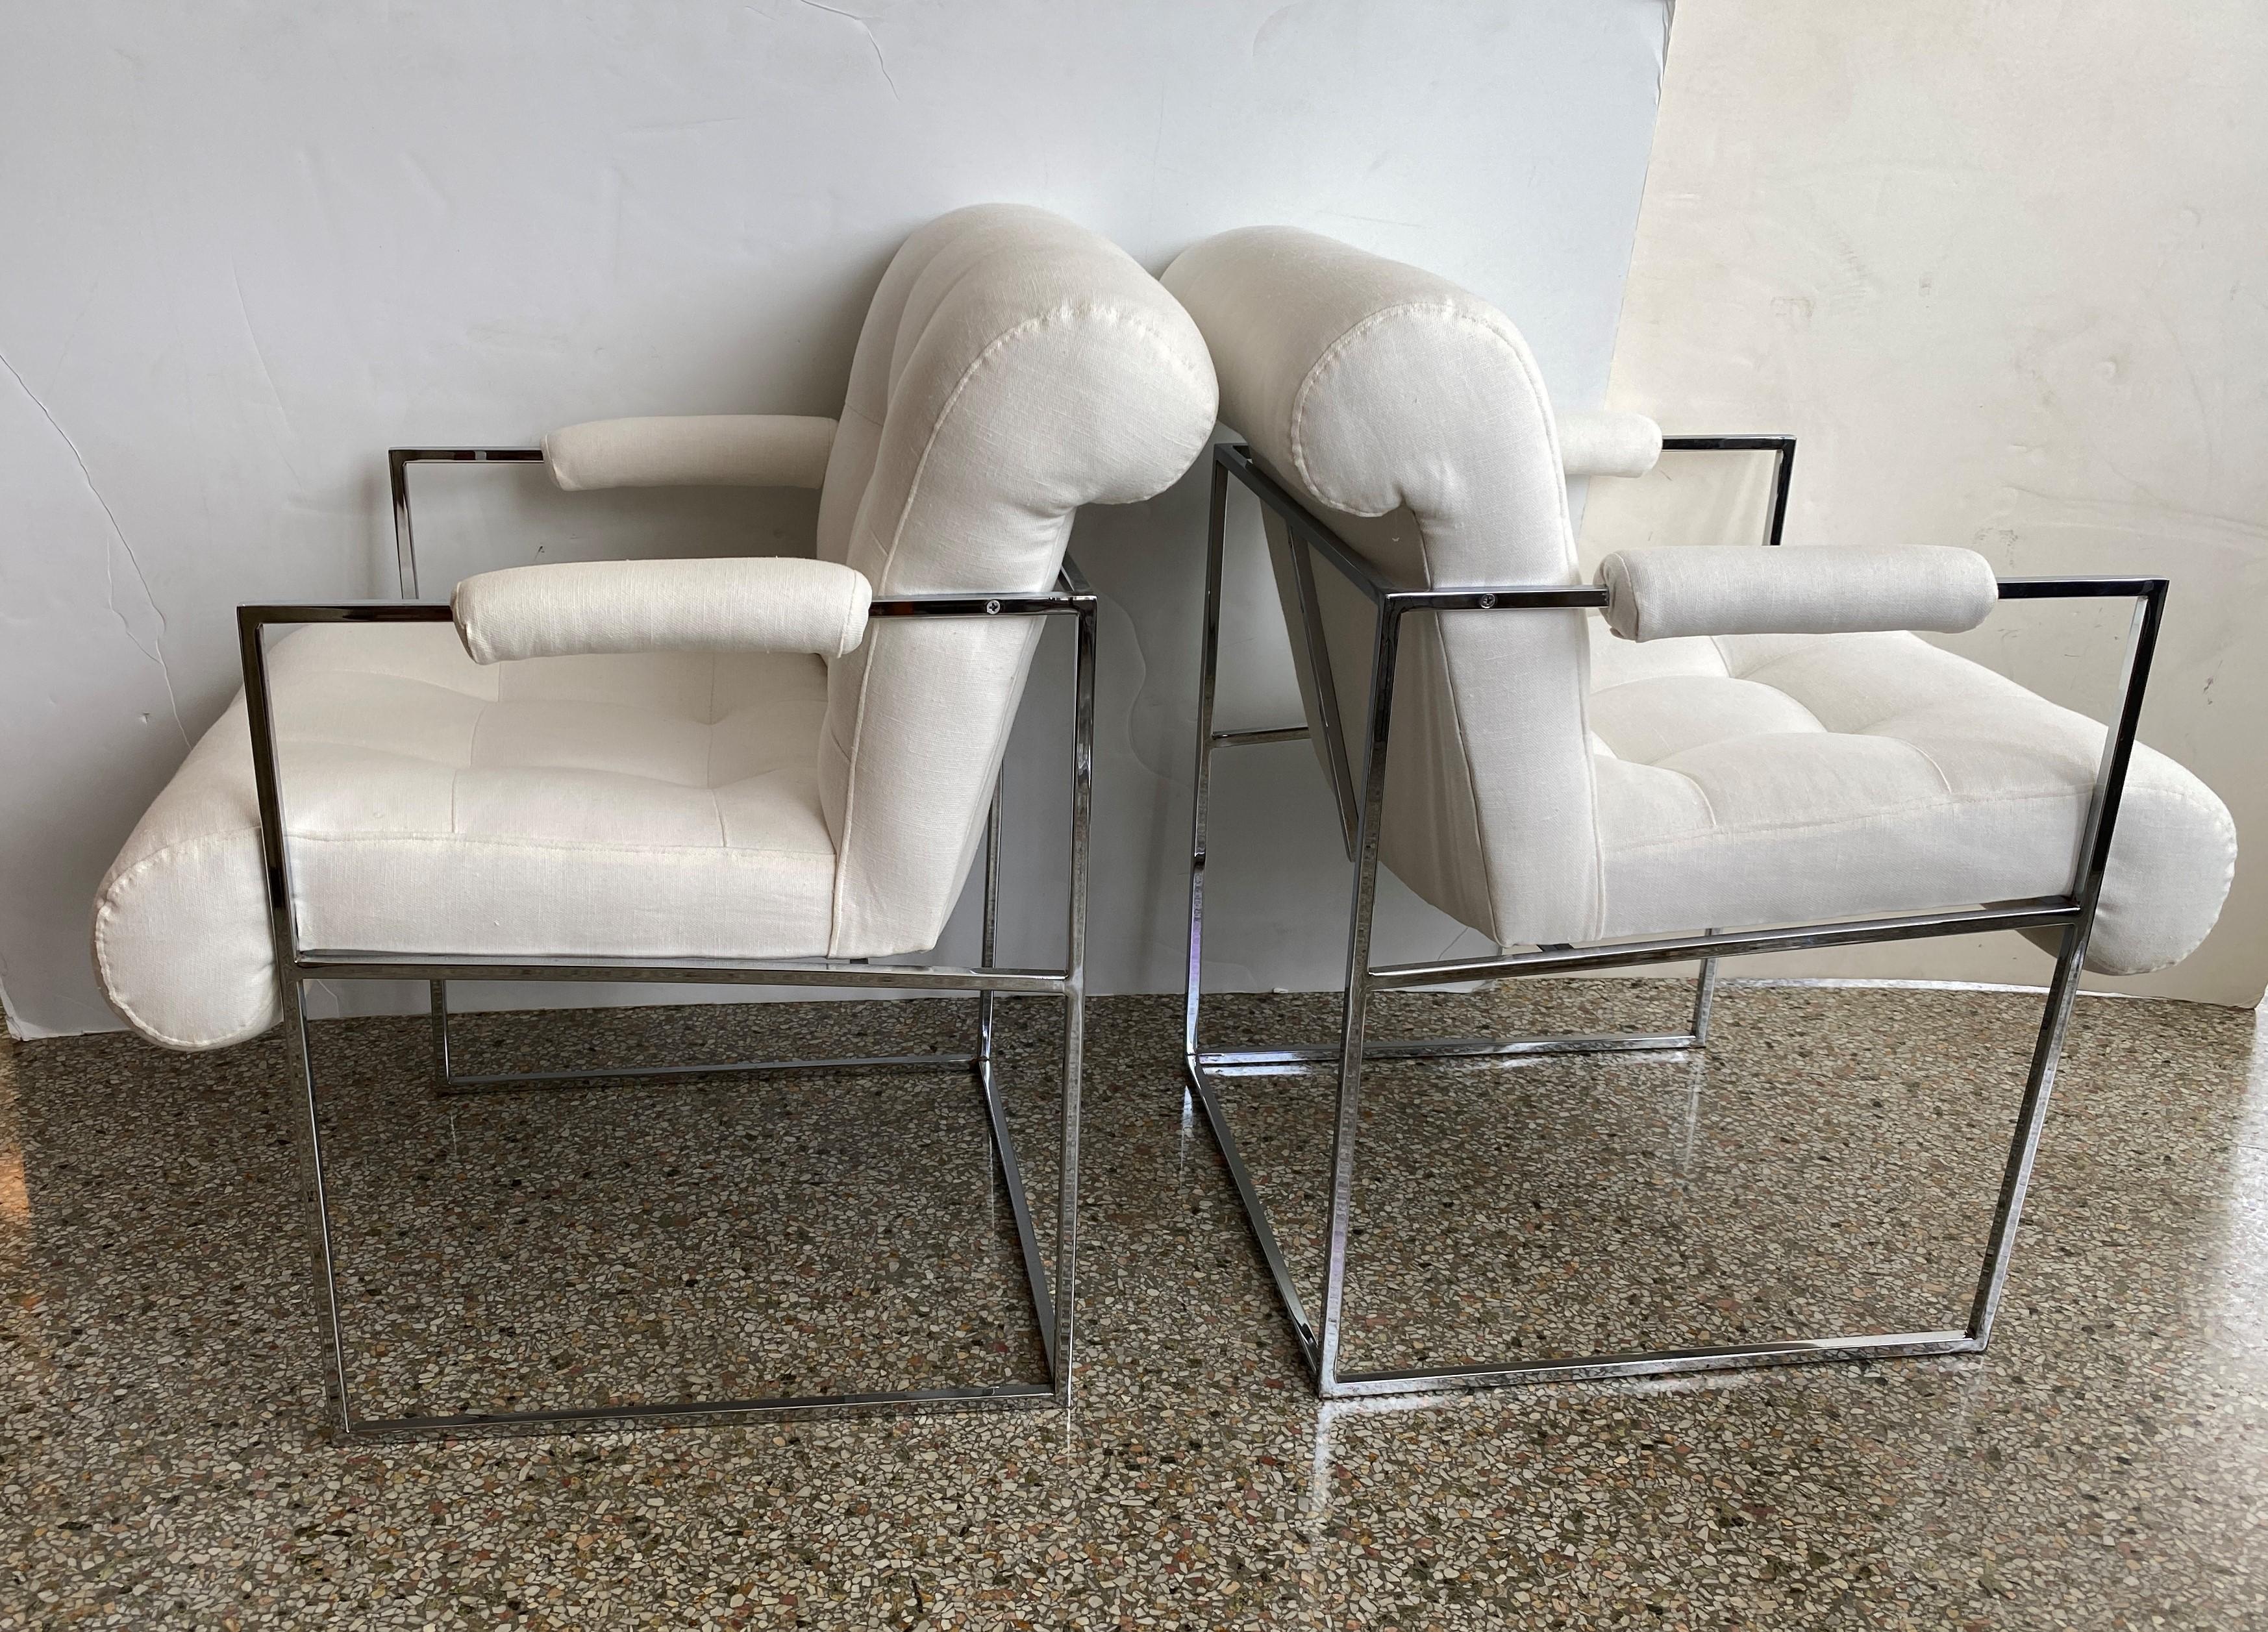 20th Century Pair of Milo Baughman Thin Line Chairs in Polished Chrome For Sale